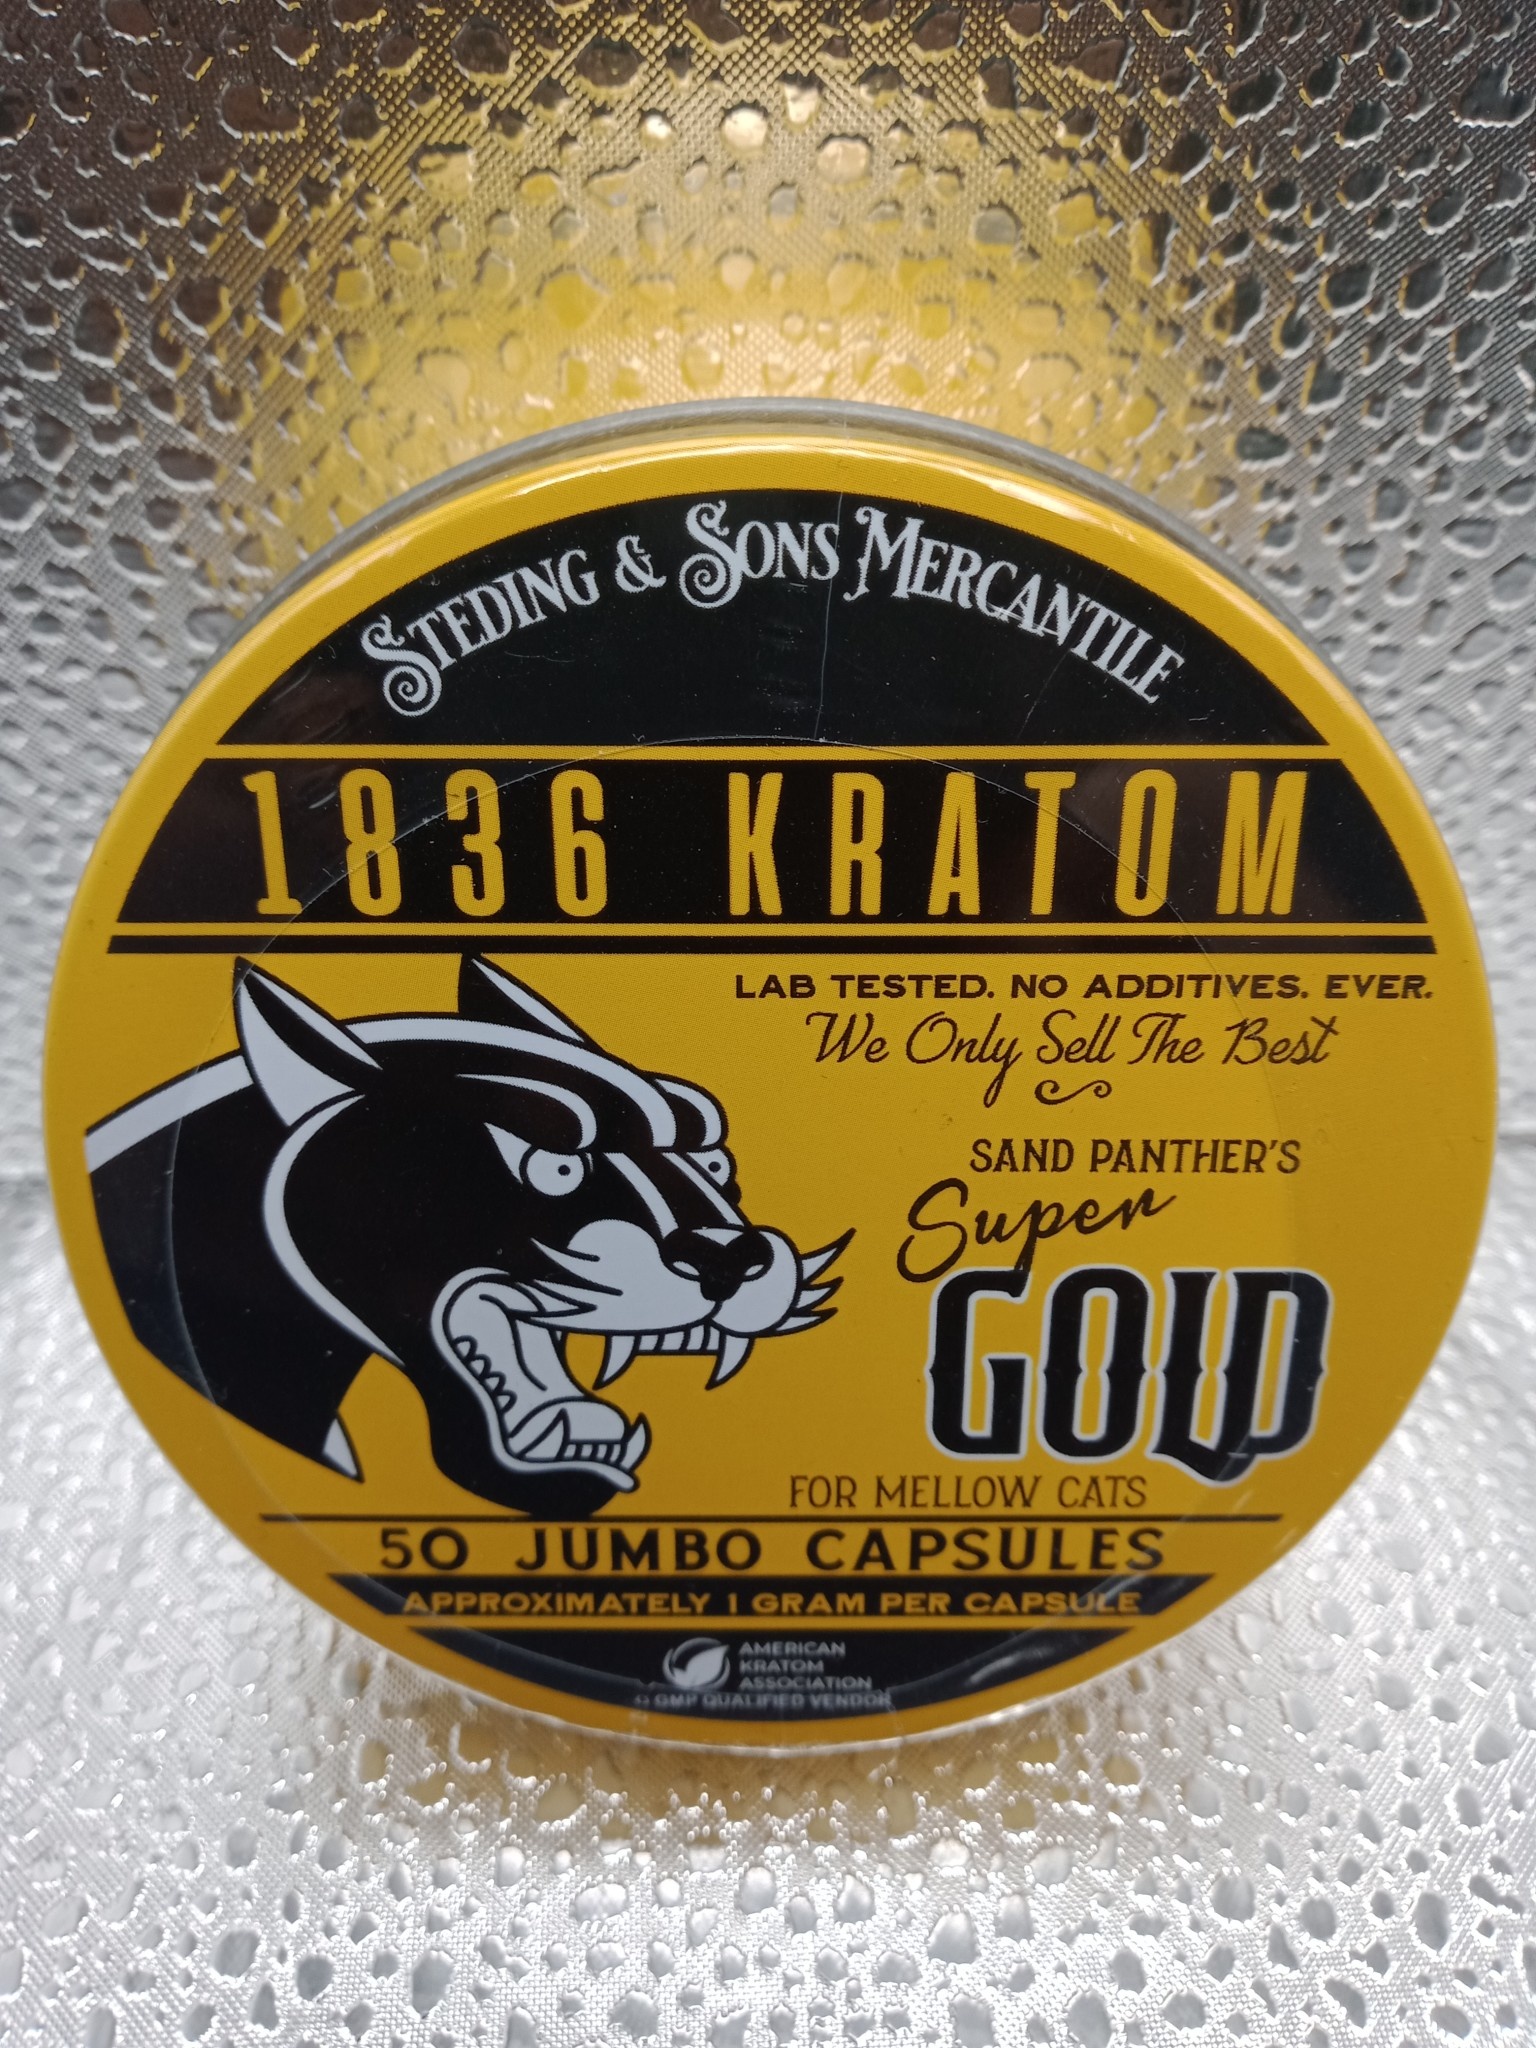 Sterling & Sons Mercantile 1836 Kratom Capsules - Sand Panther's Gold